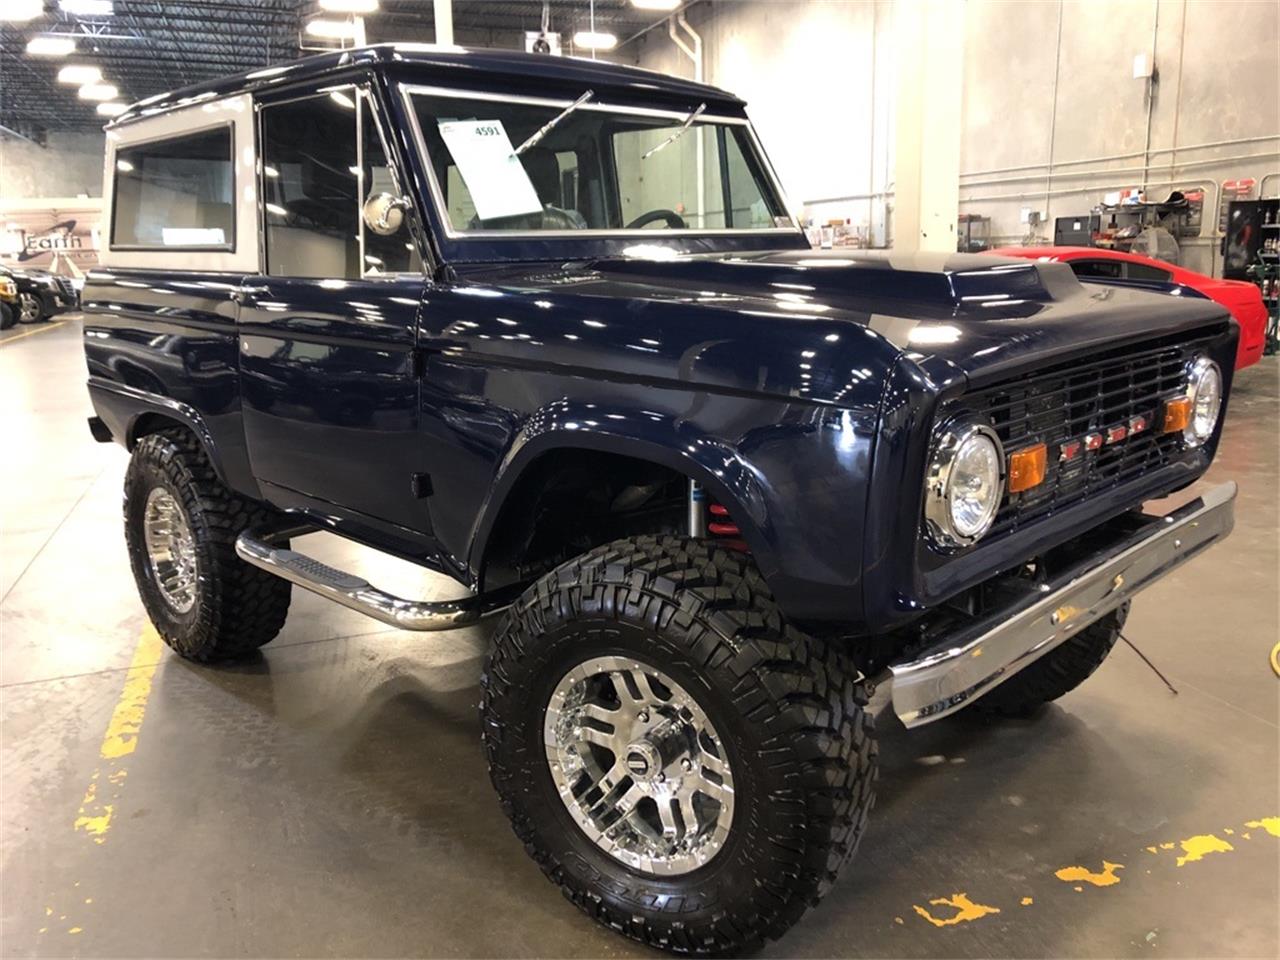 Ford Bronco For Sale Texas - Greatest Ford